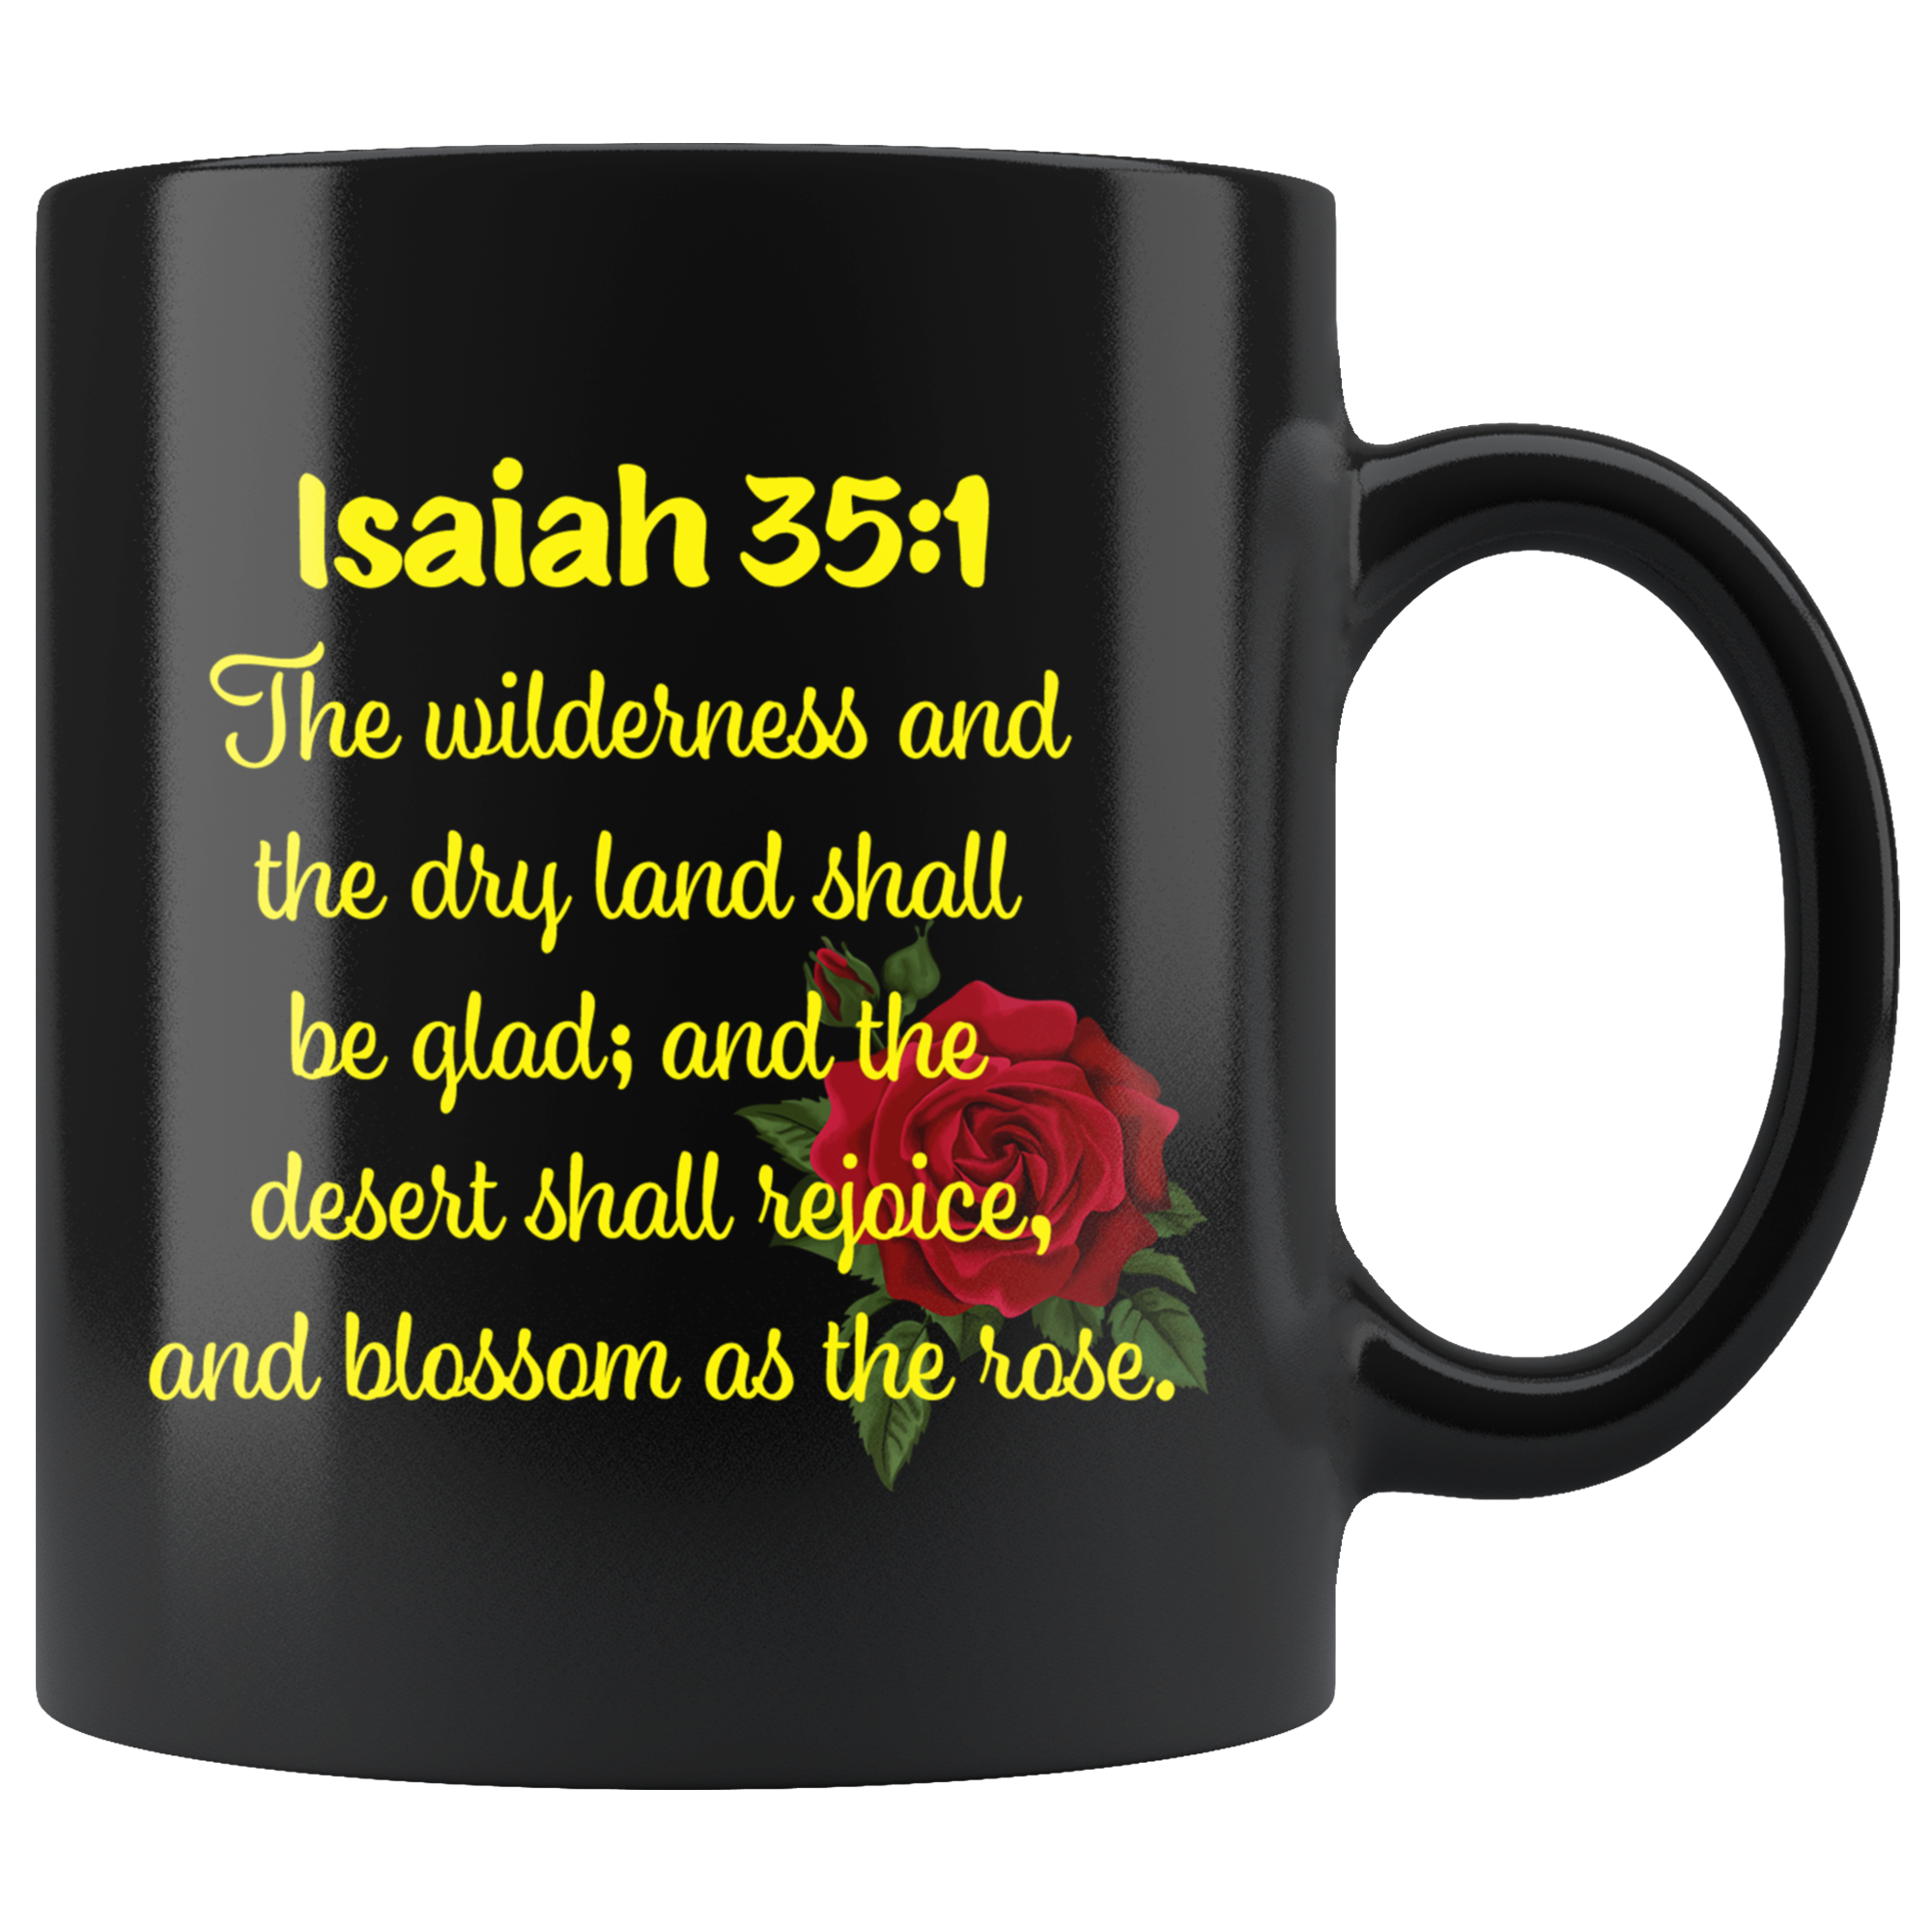 ISAIAH 35:1  -"...the desert shall rejoice, and blossom as the rose."